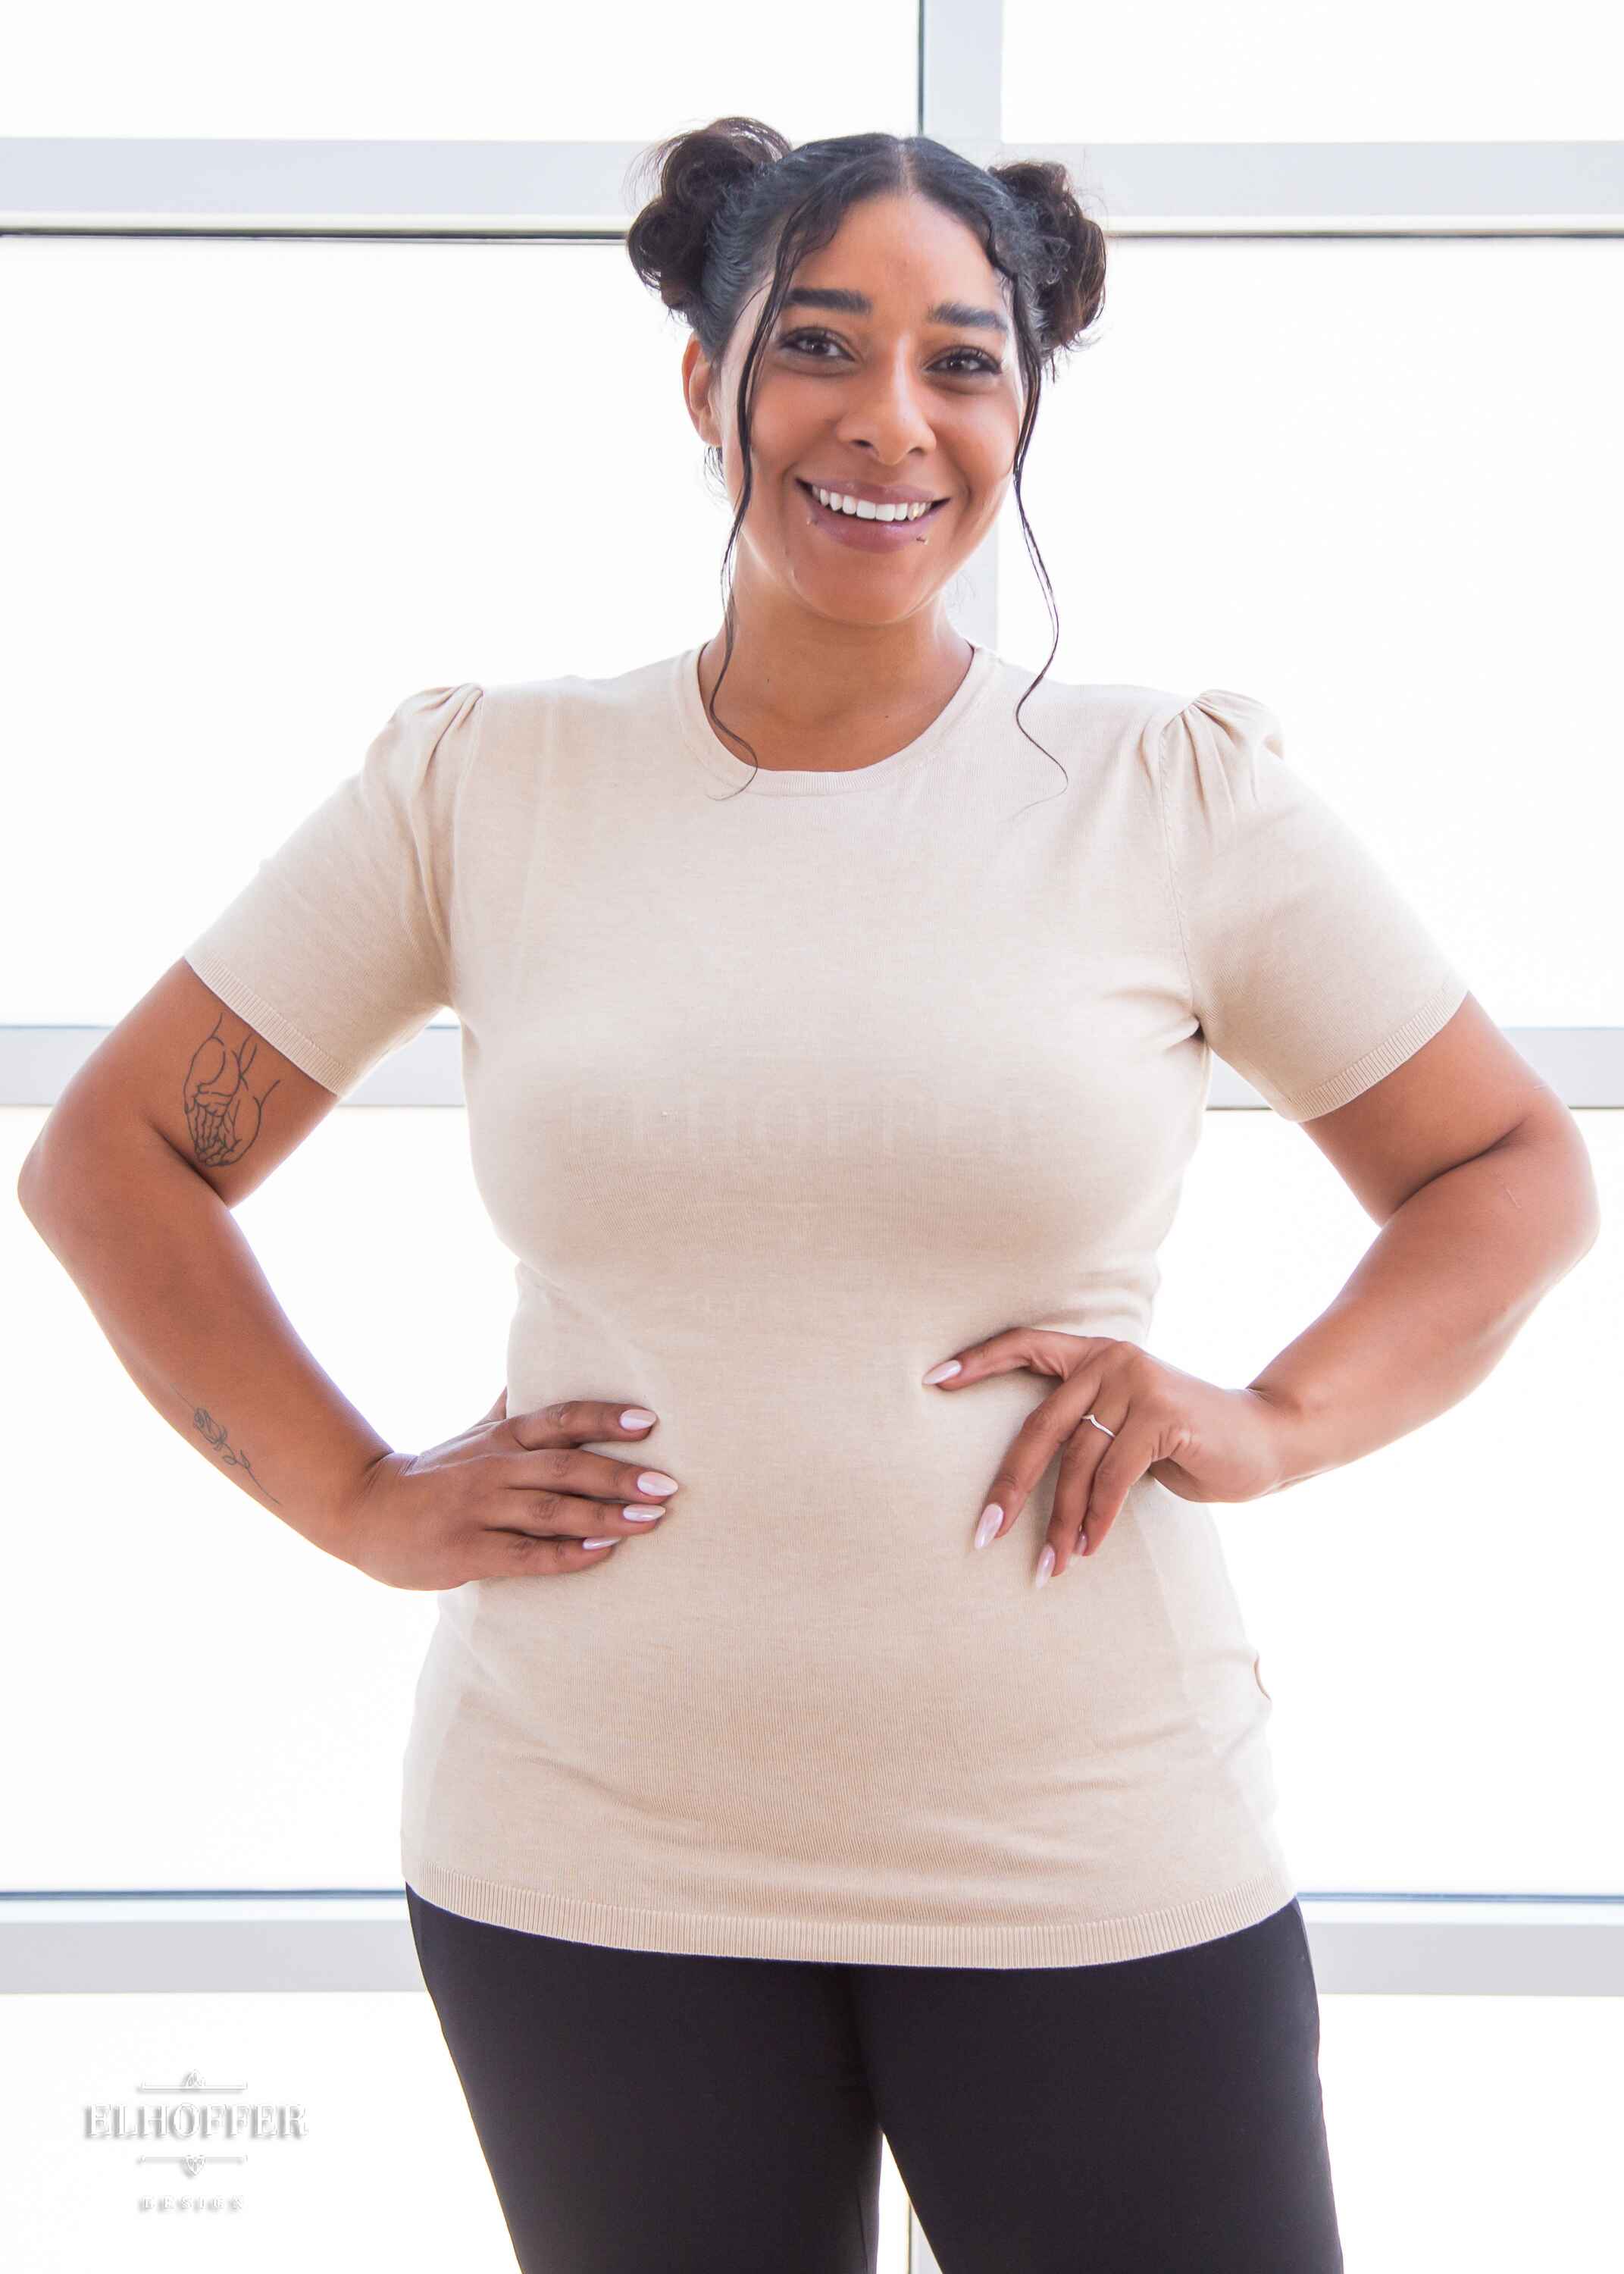 Janae, a light brown skinned L model with dark hair in space buns, is smiling while wearing a short sleeve light weight off white knit top. The top hits about mid hip in length and the sleeves have pleated gathering at the shoulders.